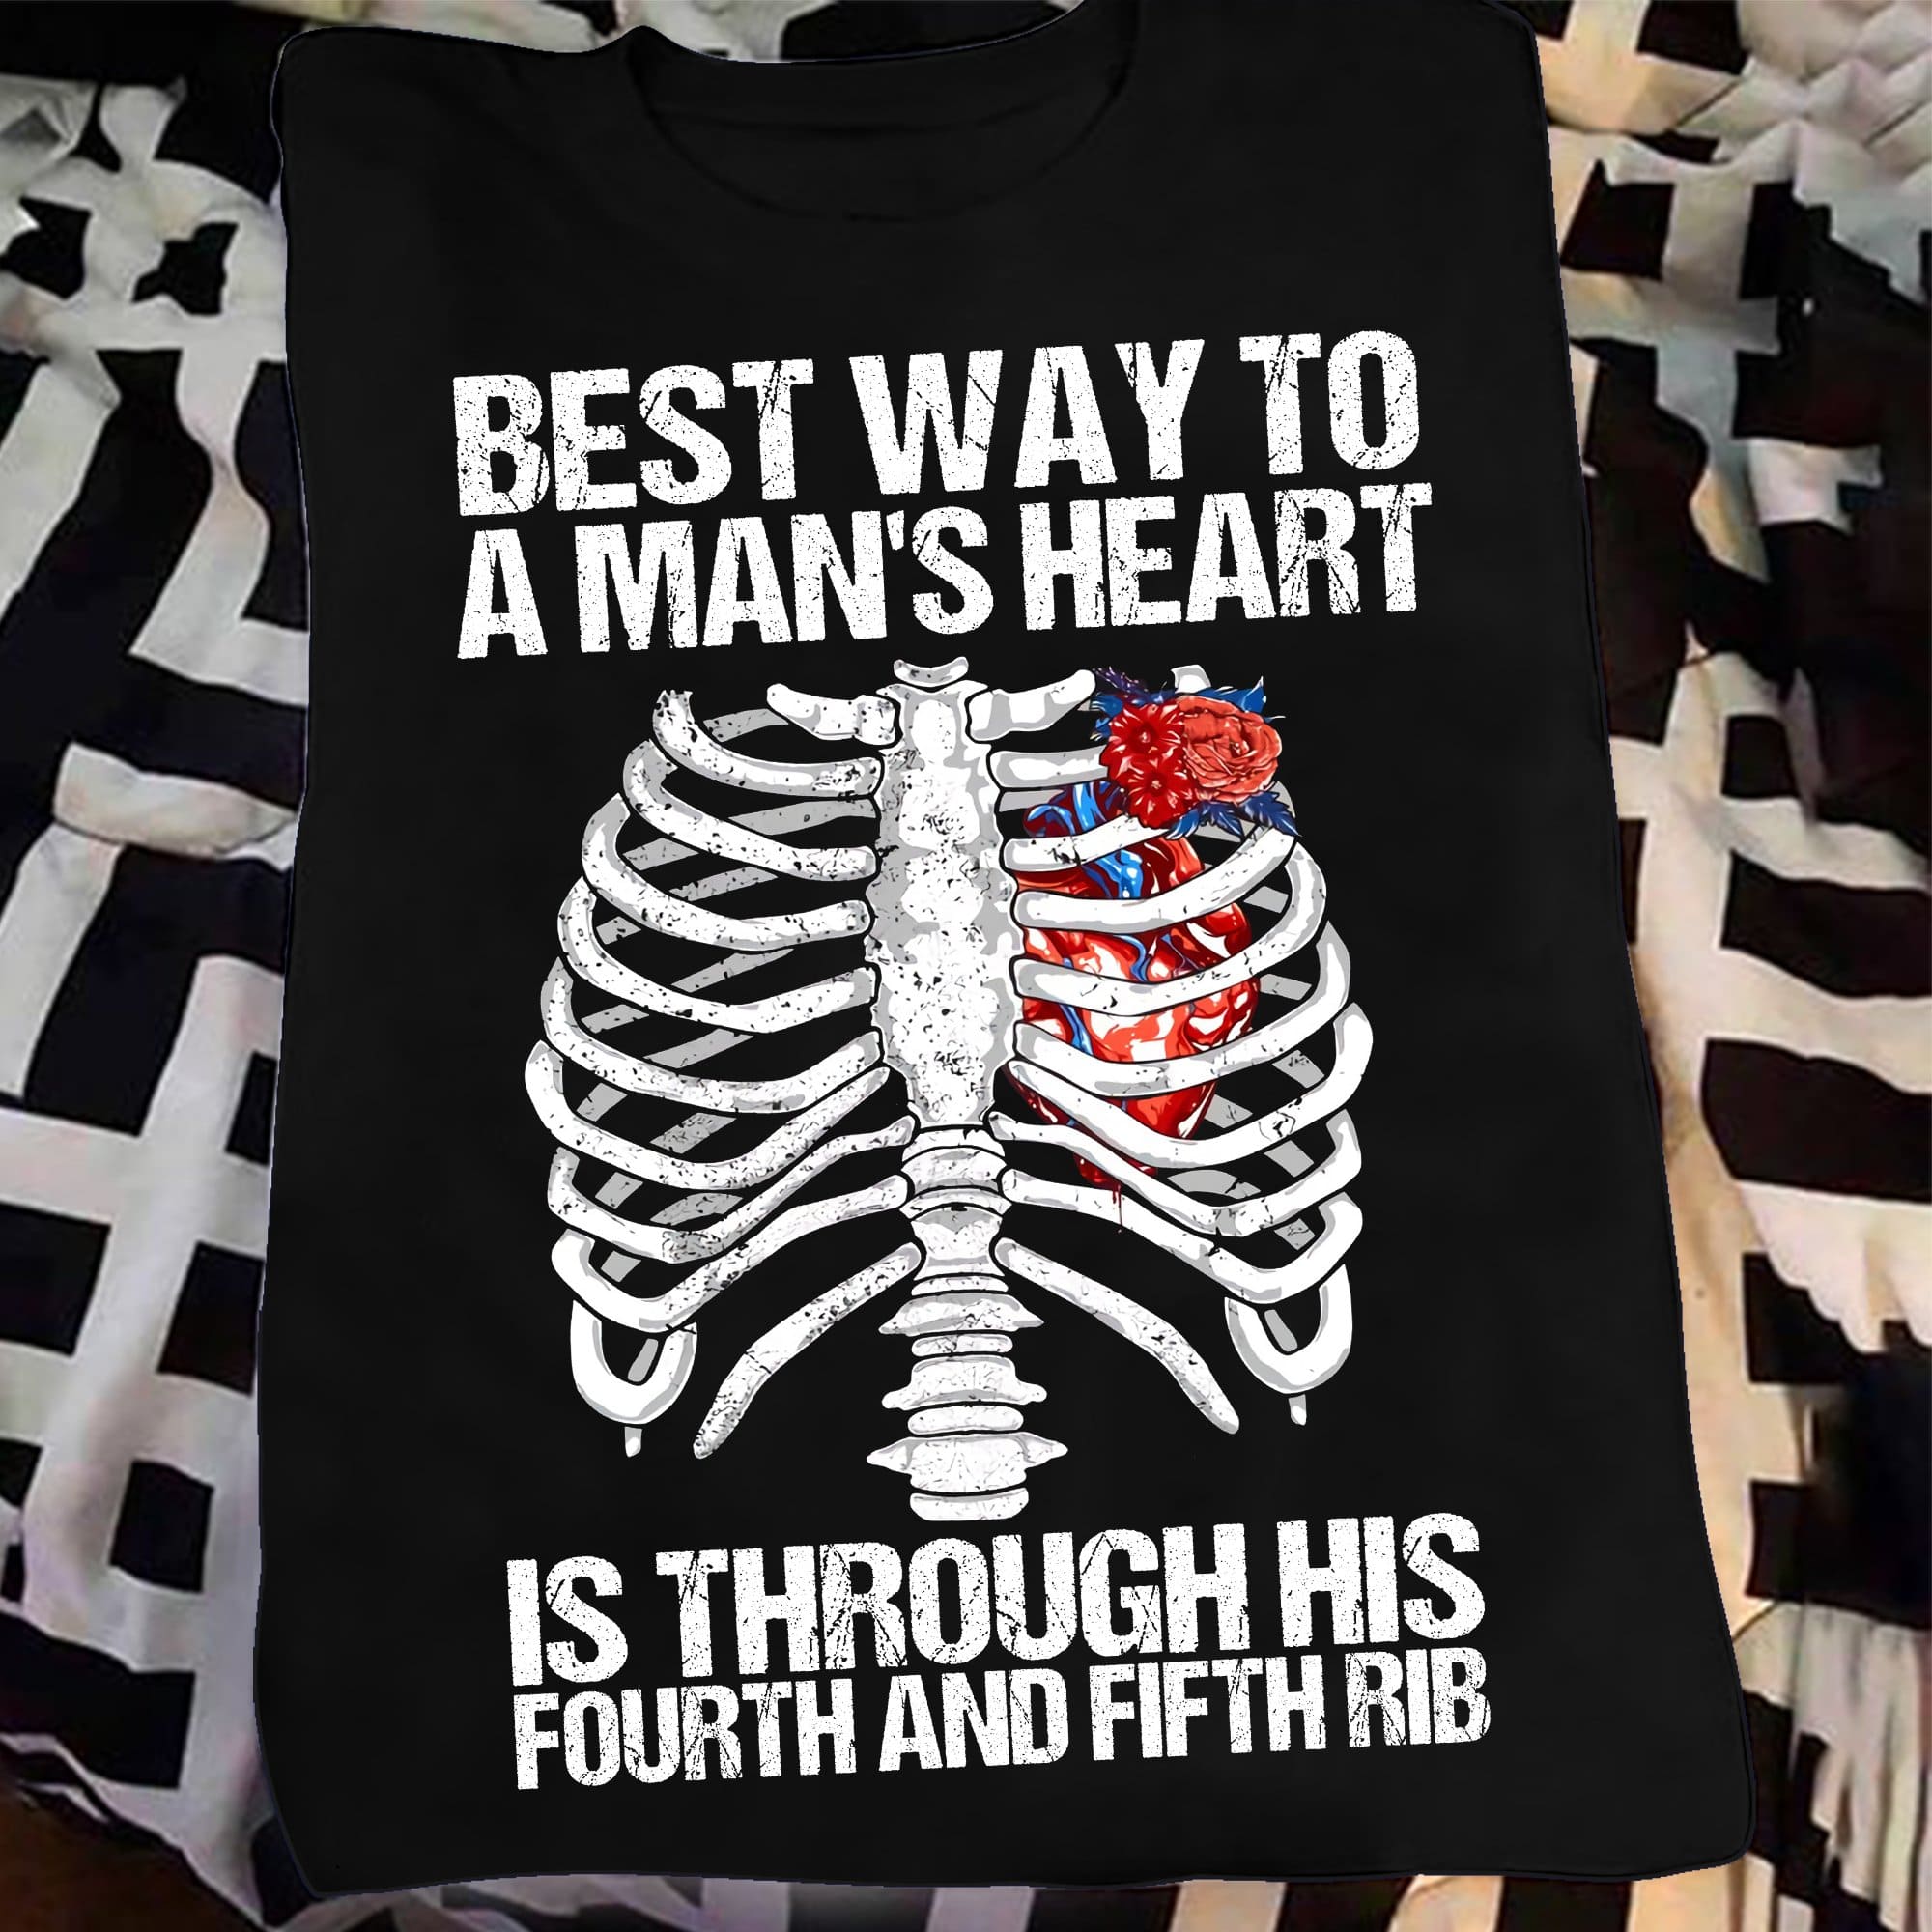 Heart In Rib - Best way to a man's heart is through his fourth and fifth rib